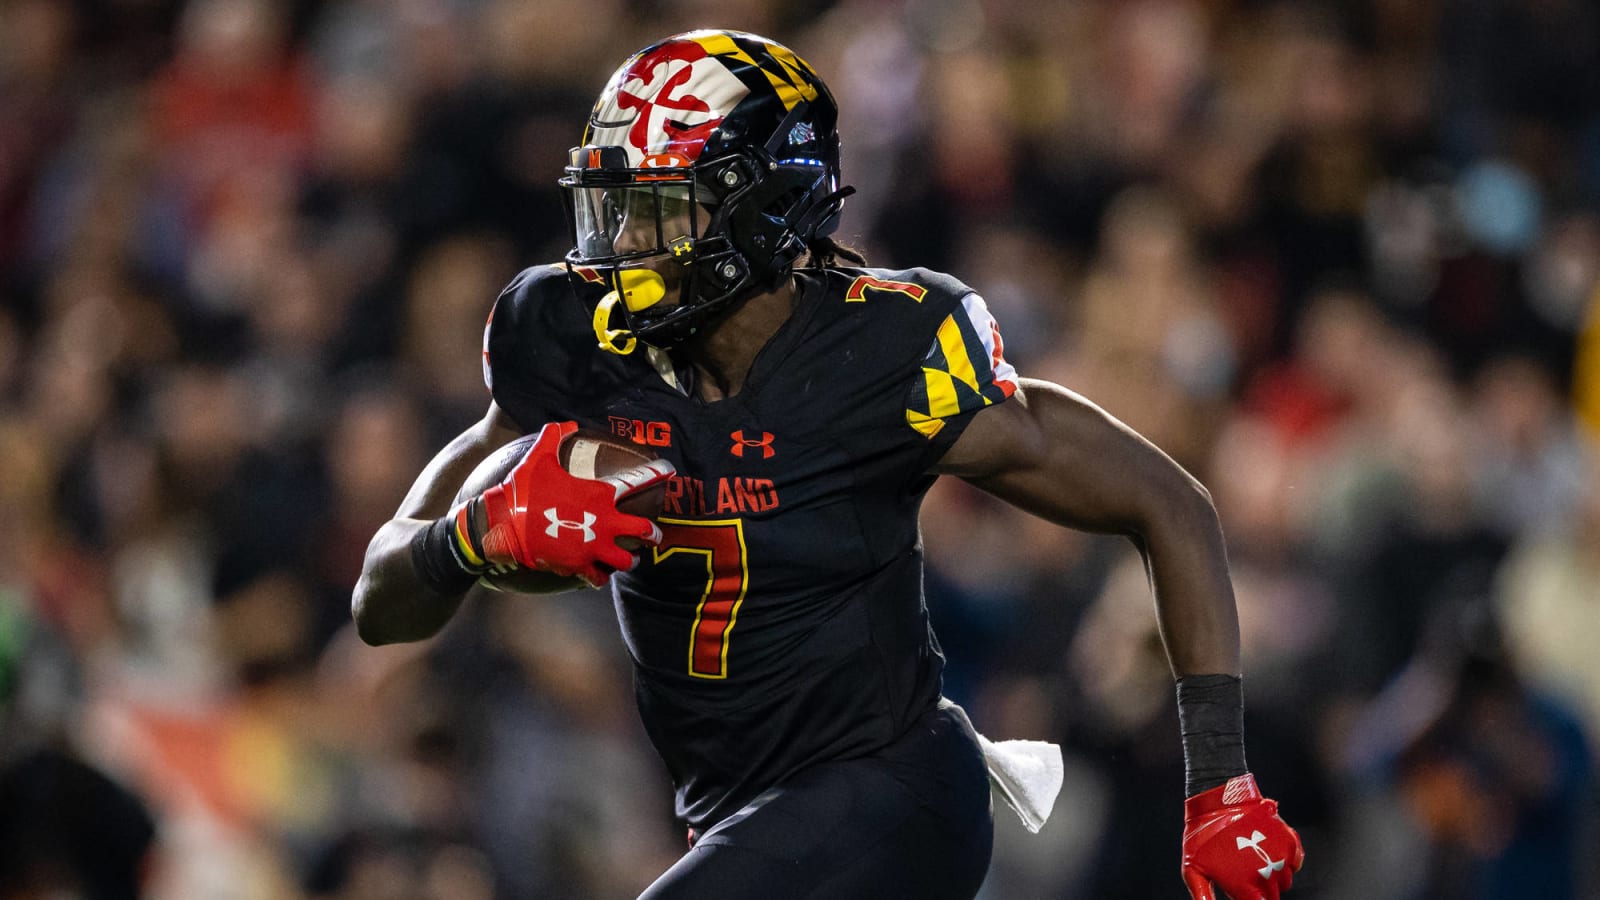 Maryland WR Dontay Demus Jr. out for season with knee injury